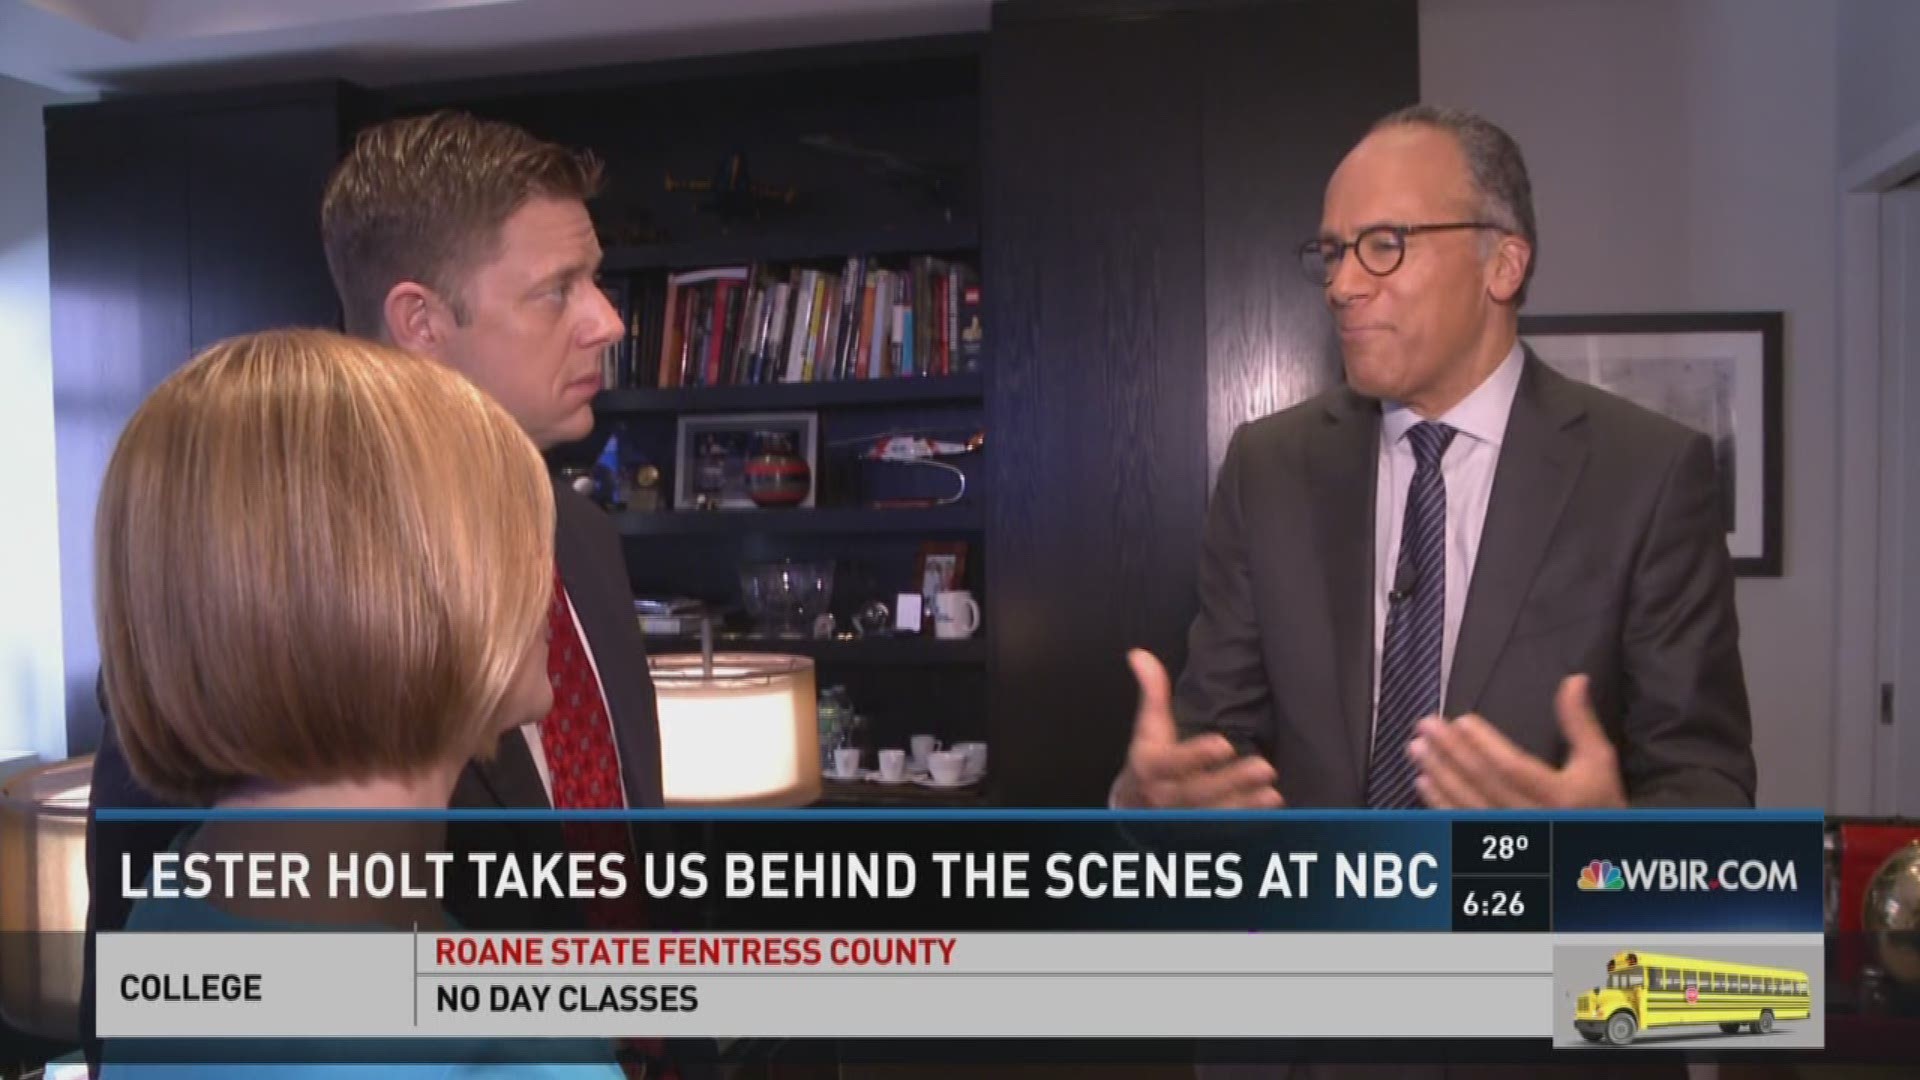 Lester Holt takes Robin and John on a tour of NBC studios in New York City.